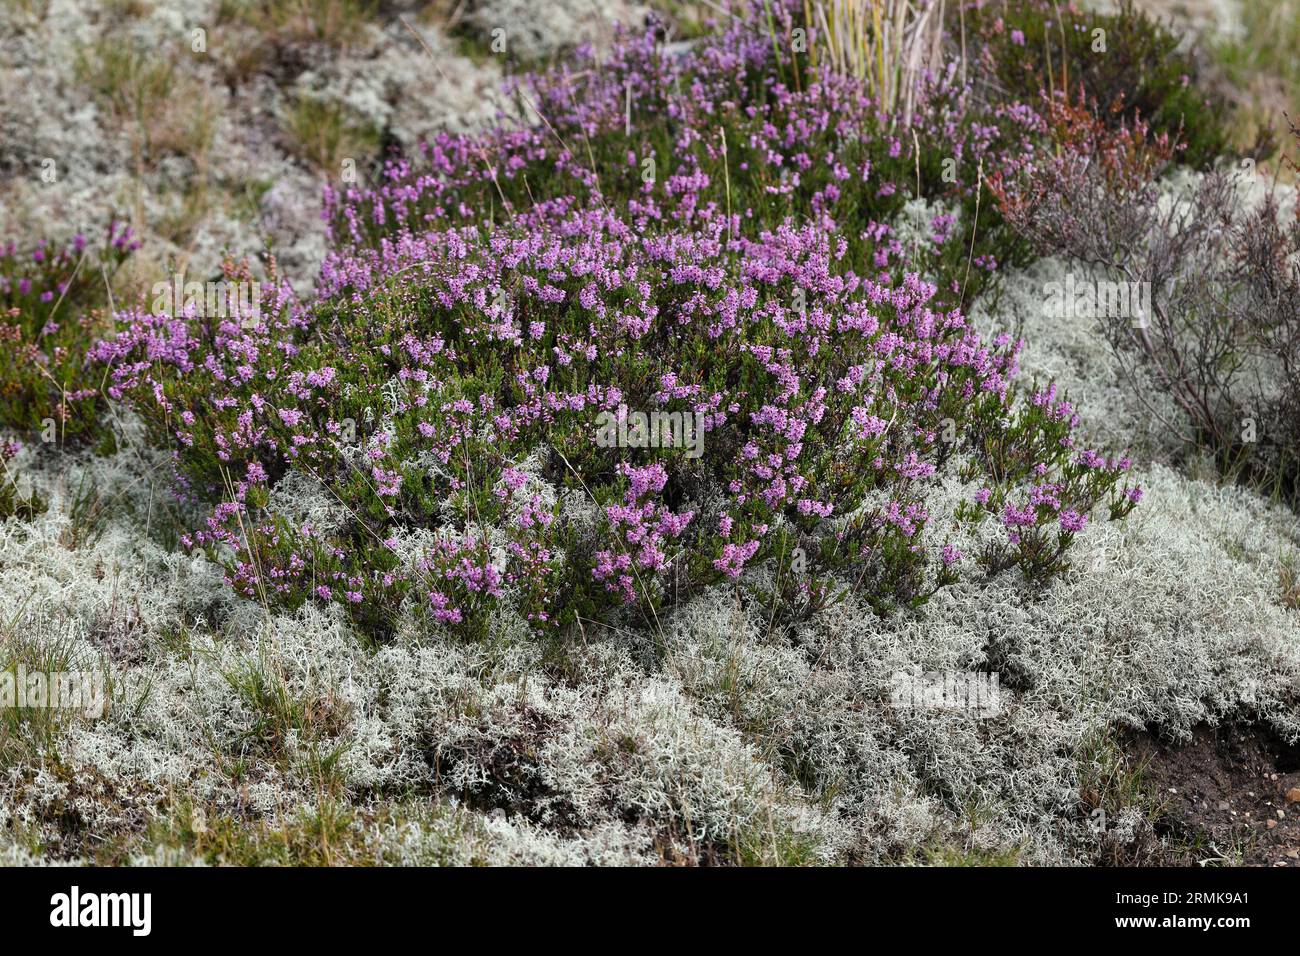 Flowering heather surrounded by Lichen, Swaledale, Yorkshire Dales National Park, UK Stock Photo